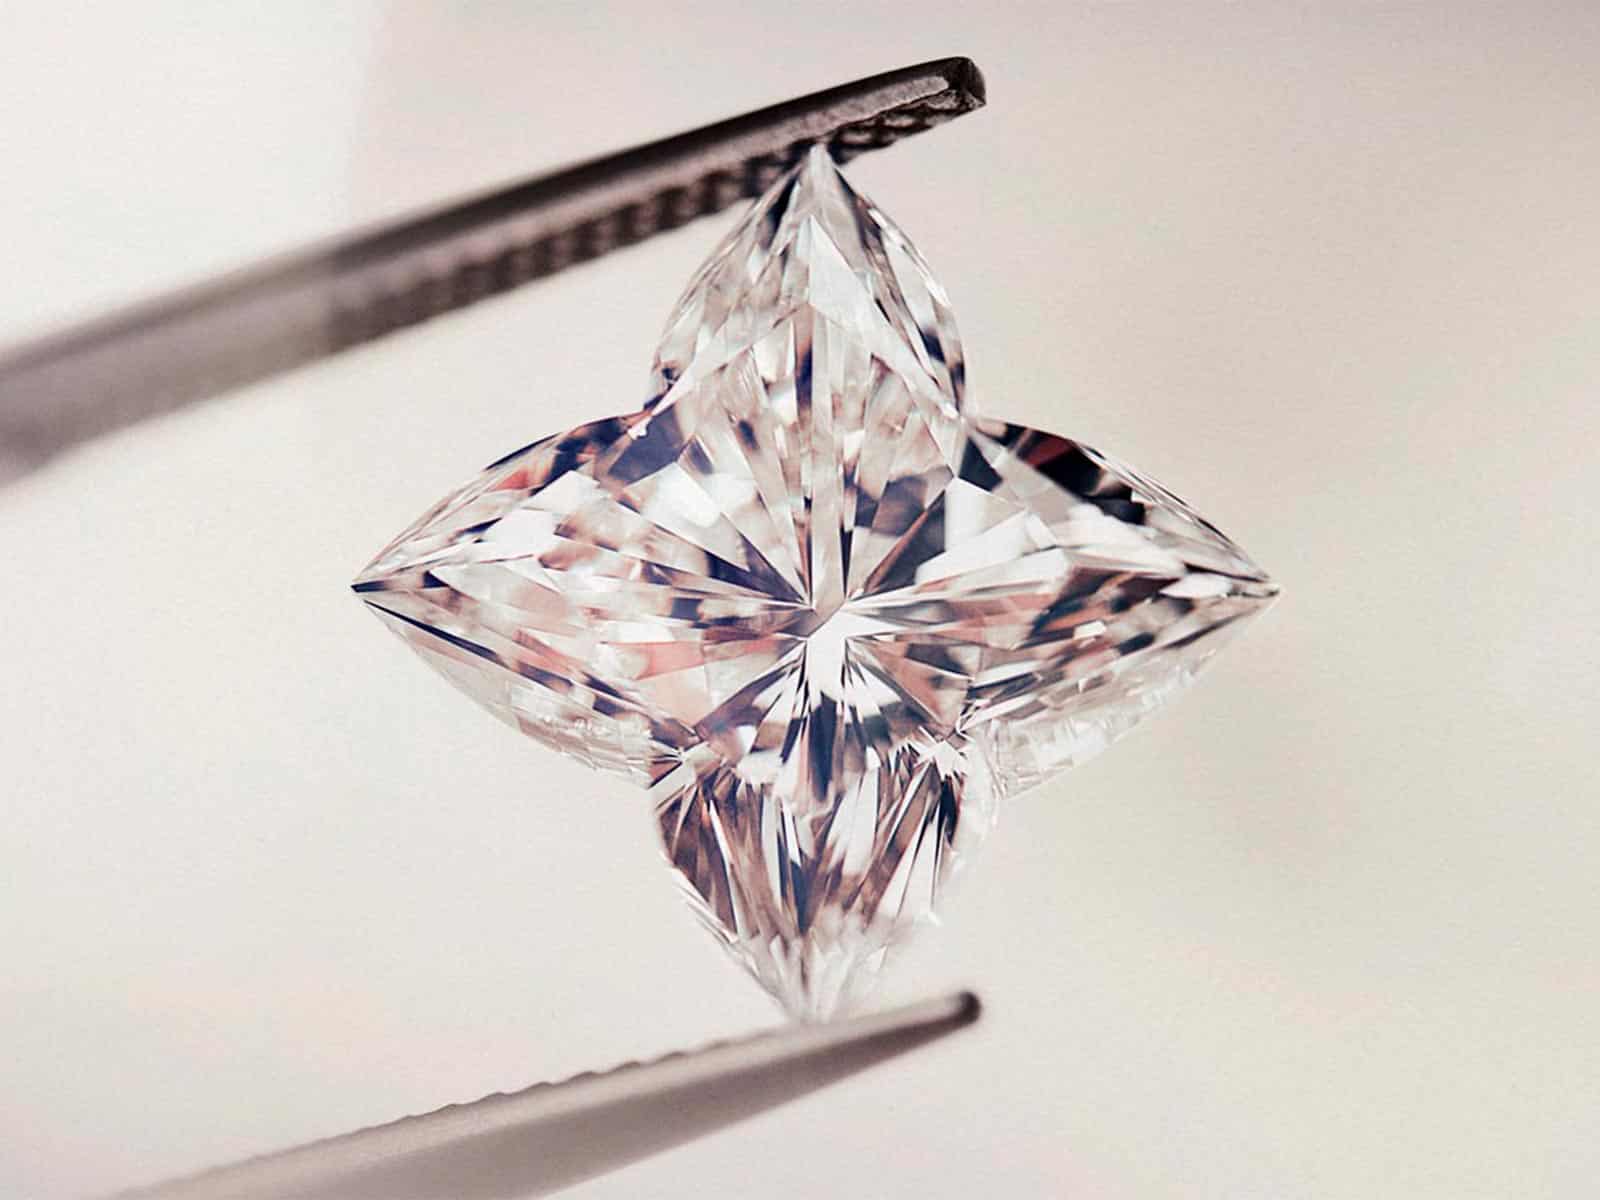 LV Diamonds is Louis Vuitton's new fine jewellery collection